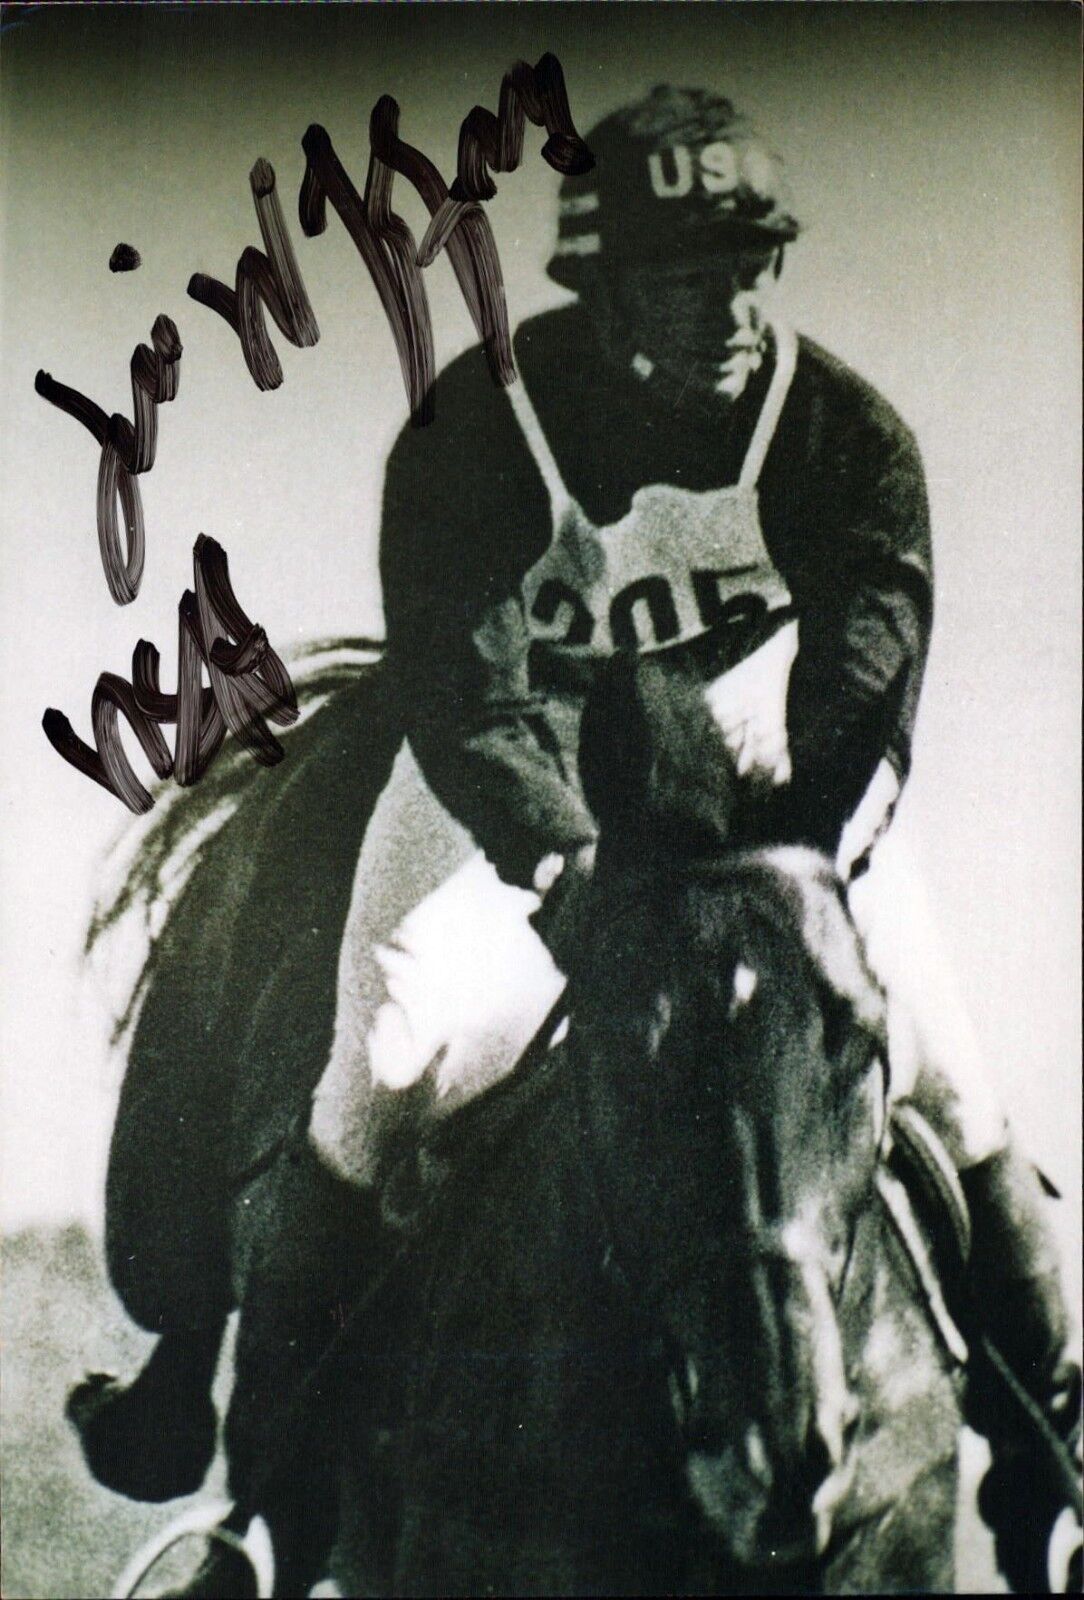 James Wofford USA OLYMPIA Silver 1968 Military Riding Autograph Photo Poster painting (B-8998